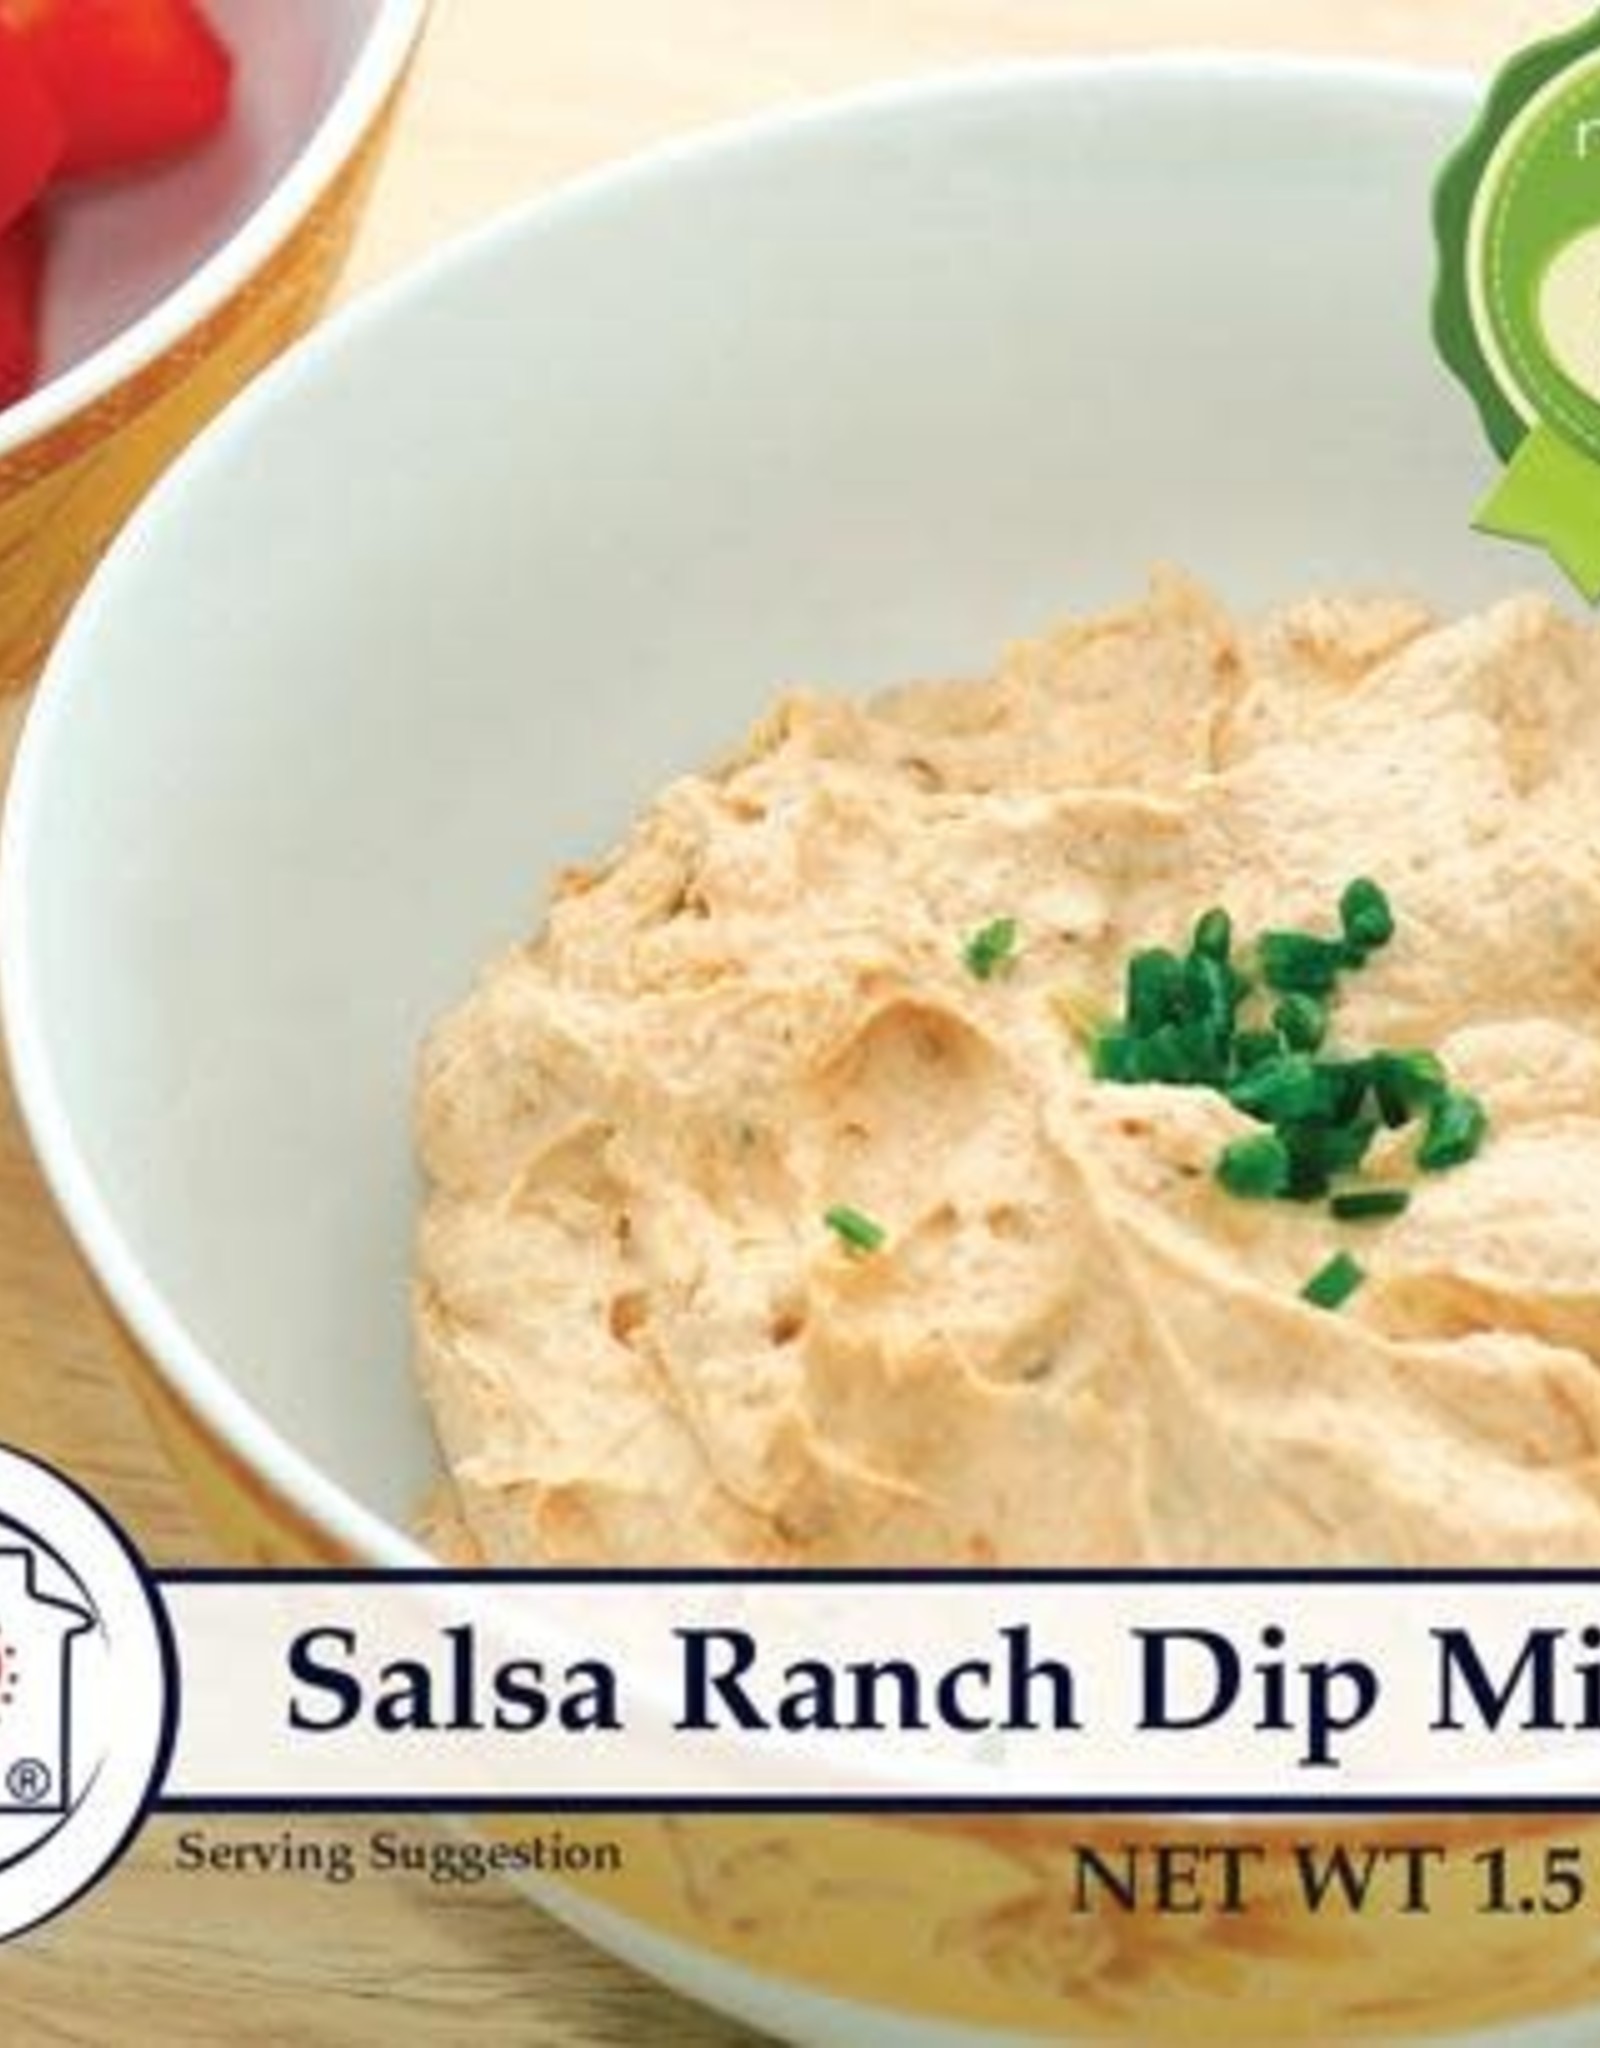 Country Home Creations SALSA RANCH DIP MIX